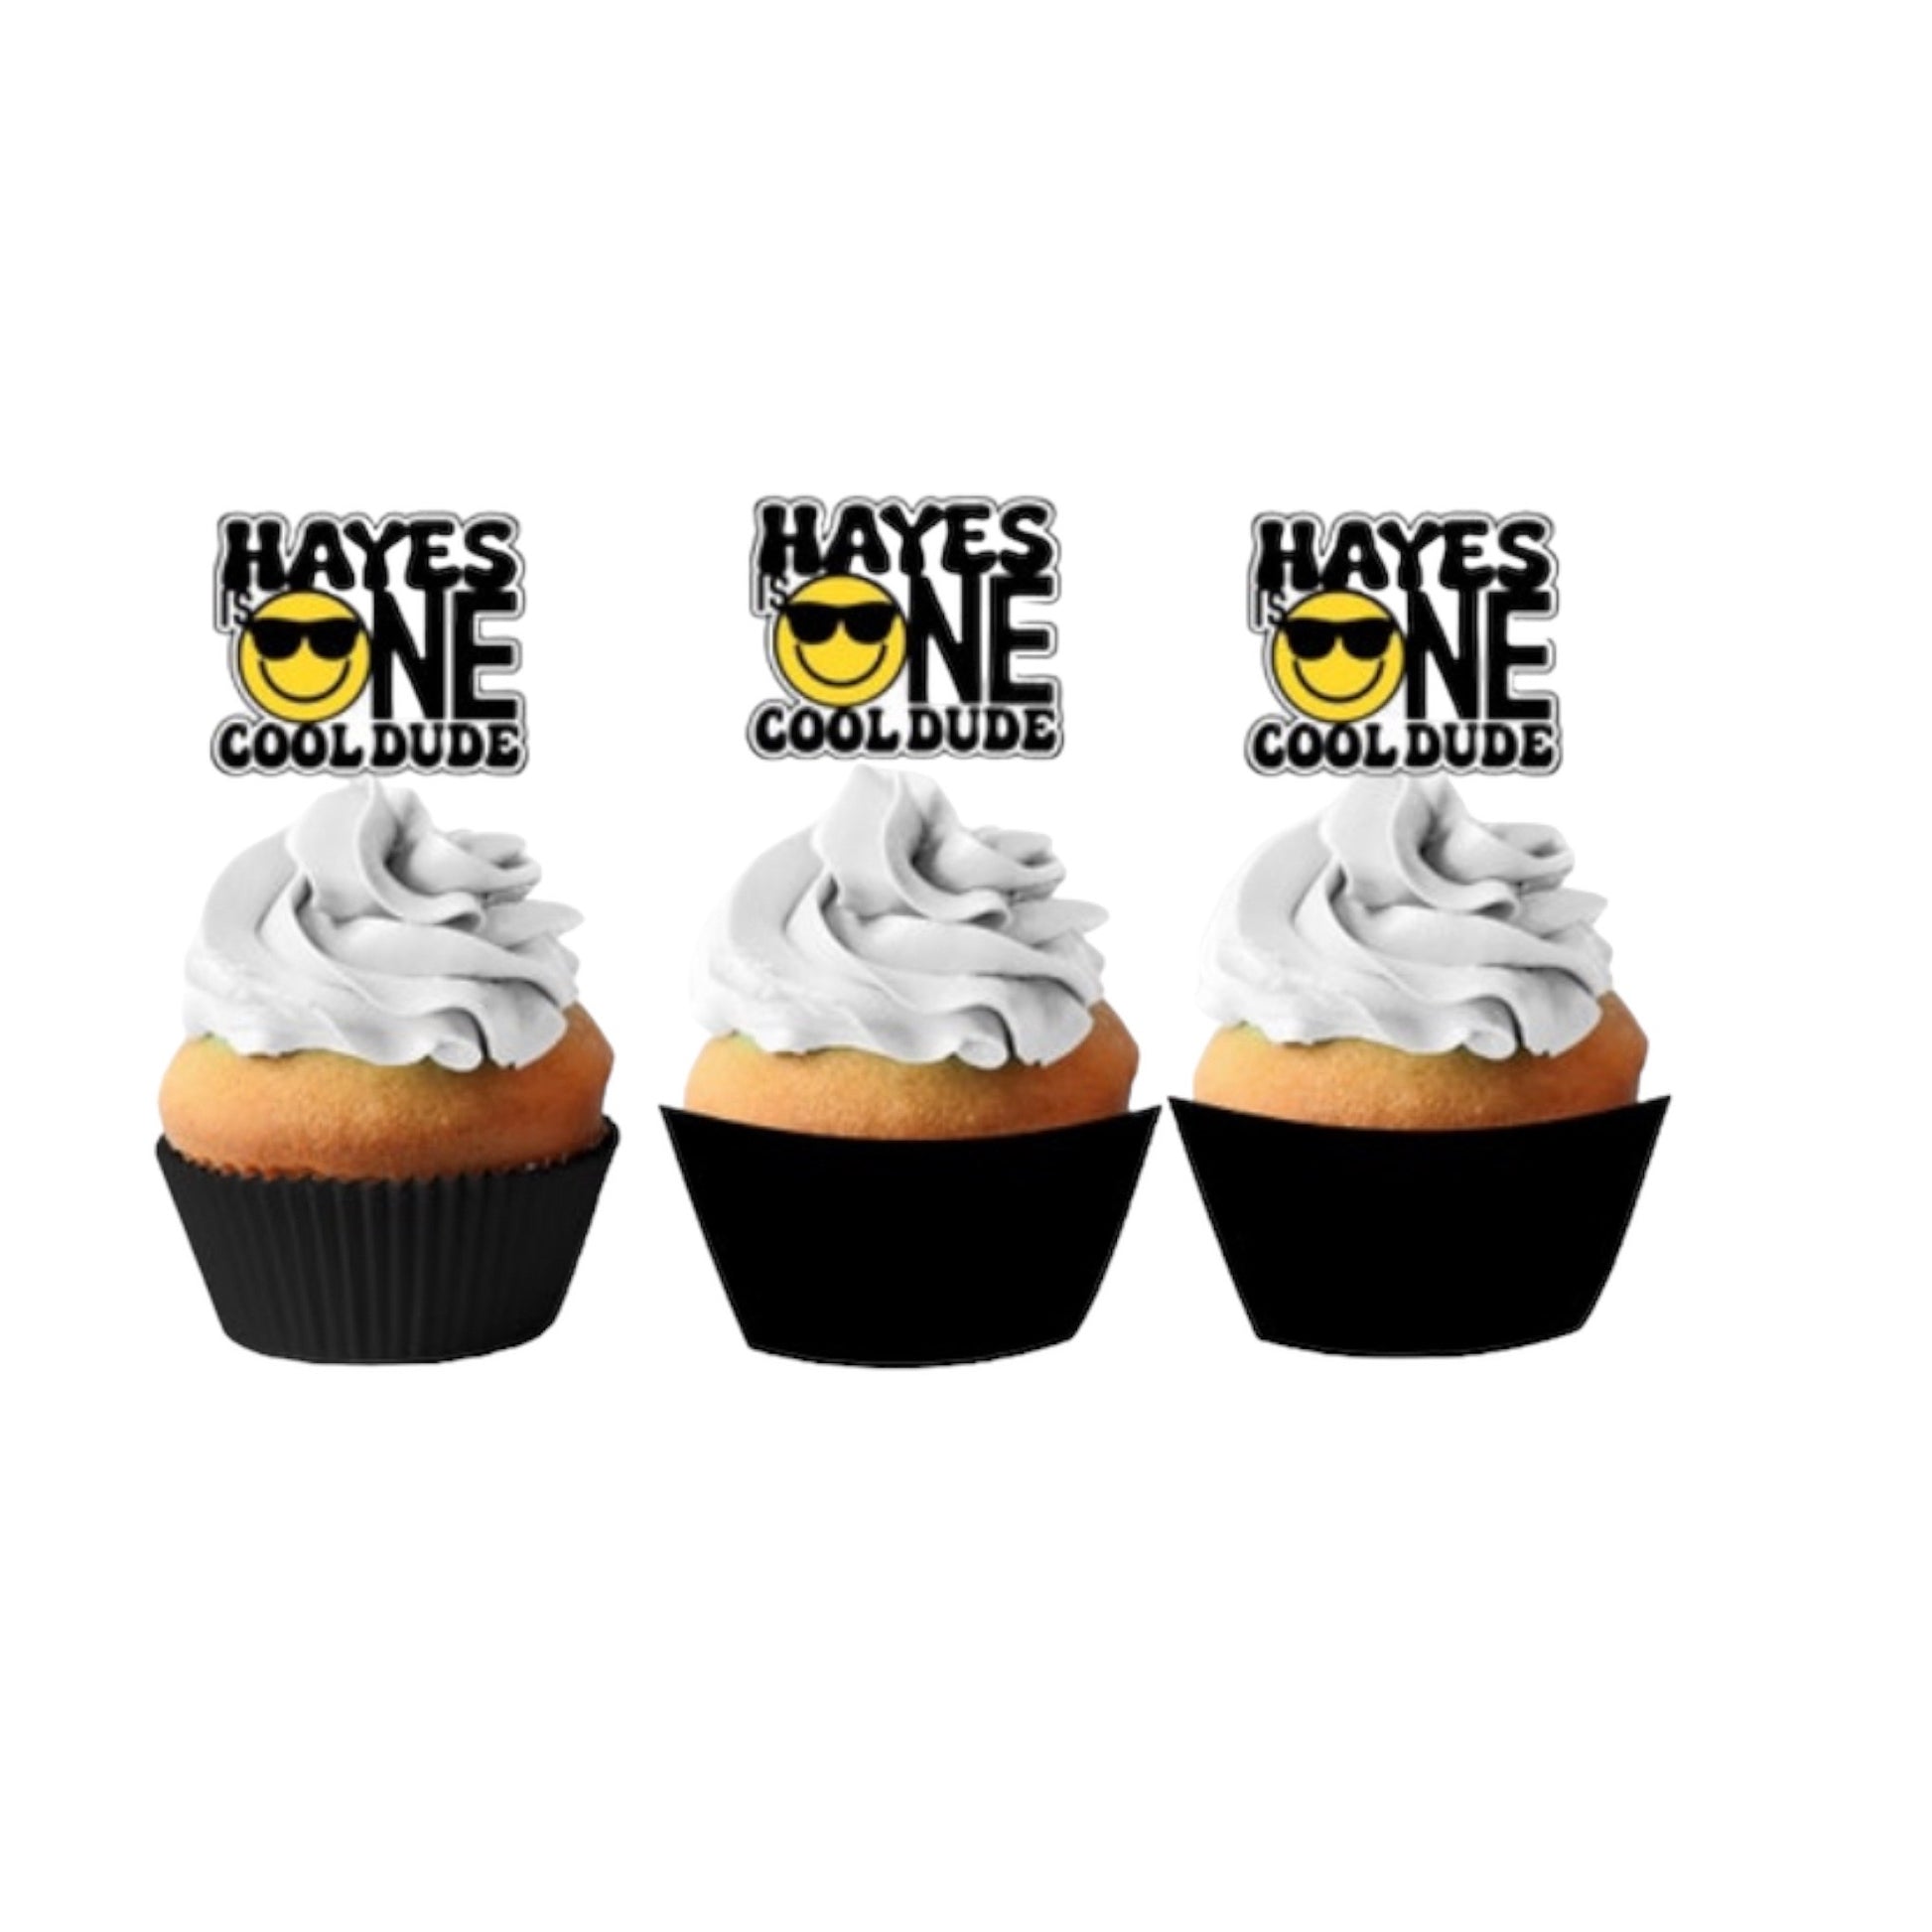 ONE cool dude personalized cupcake toppers